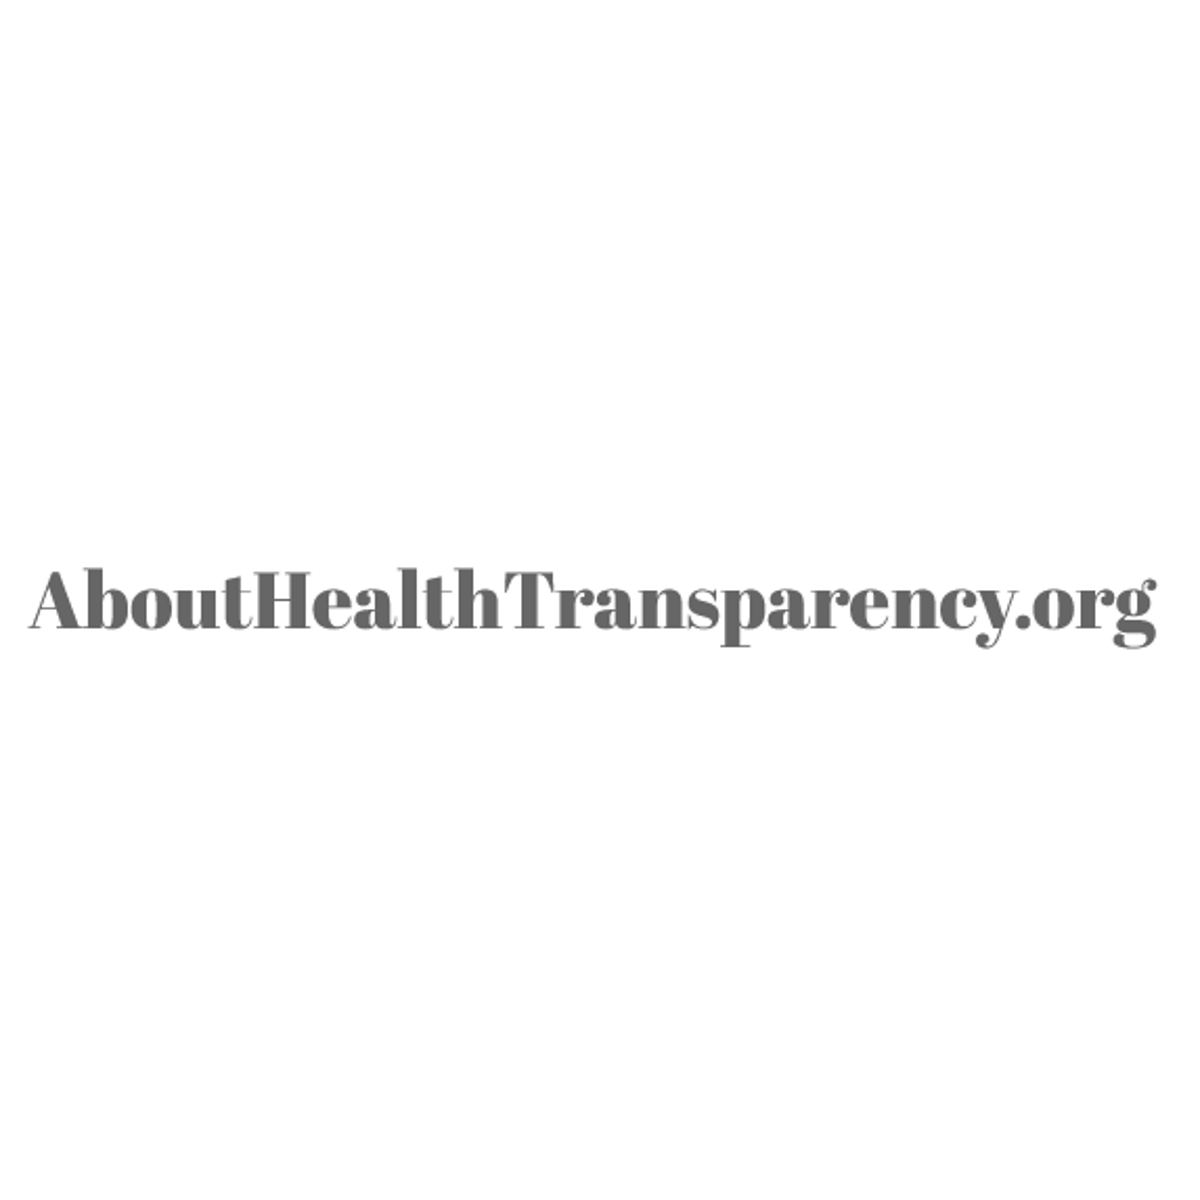 AboutHealthTransparency.org logo